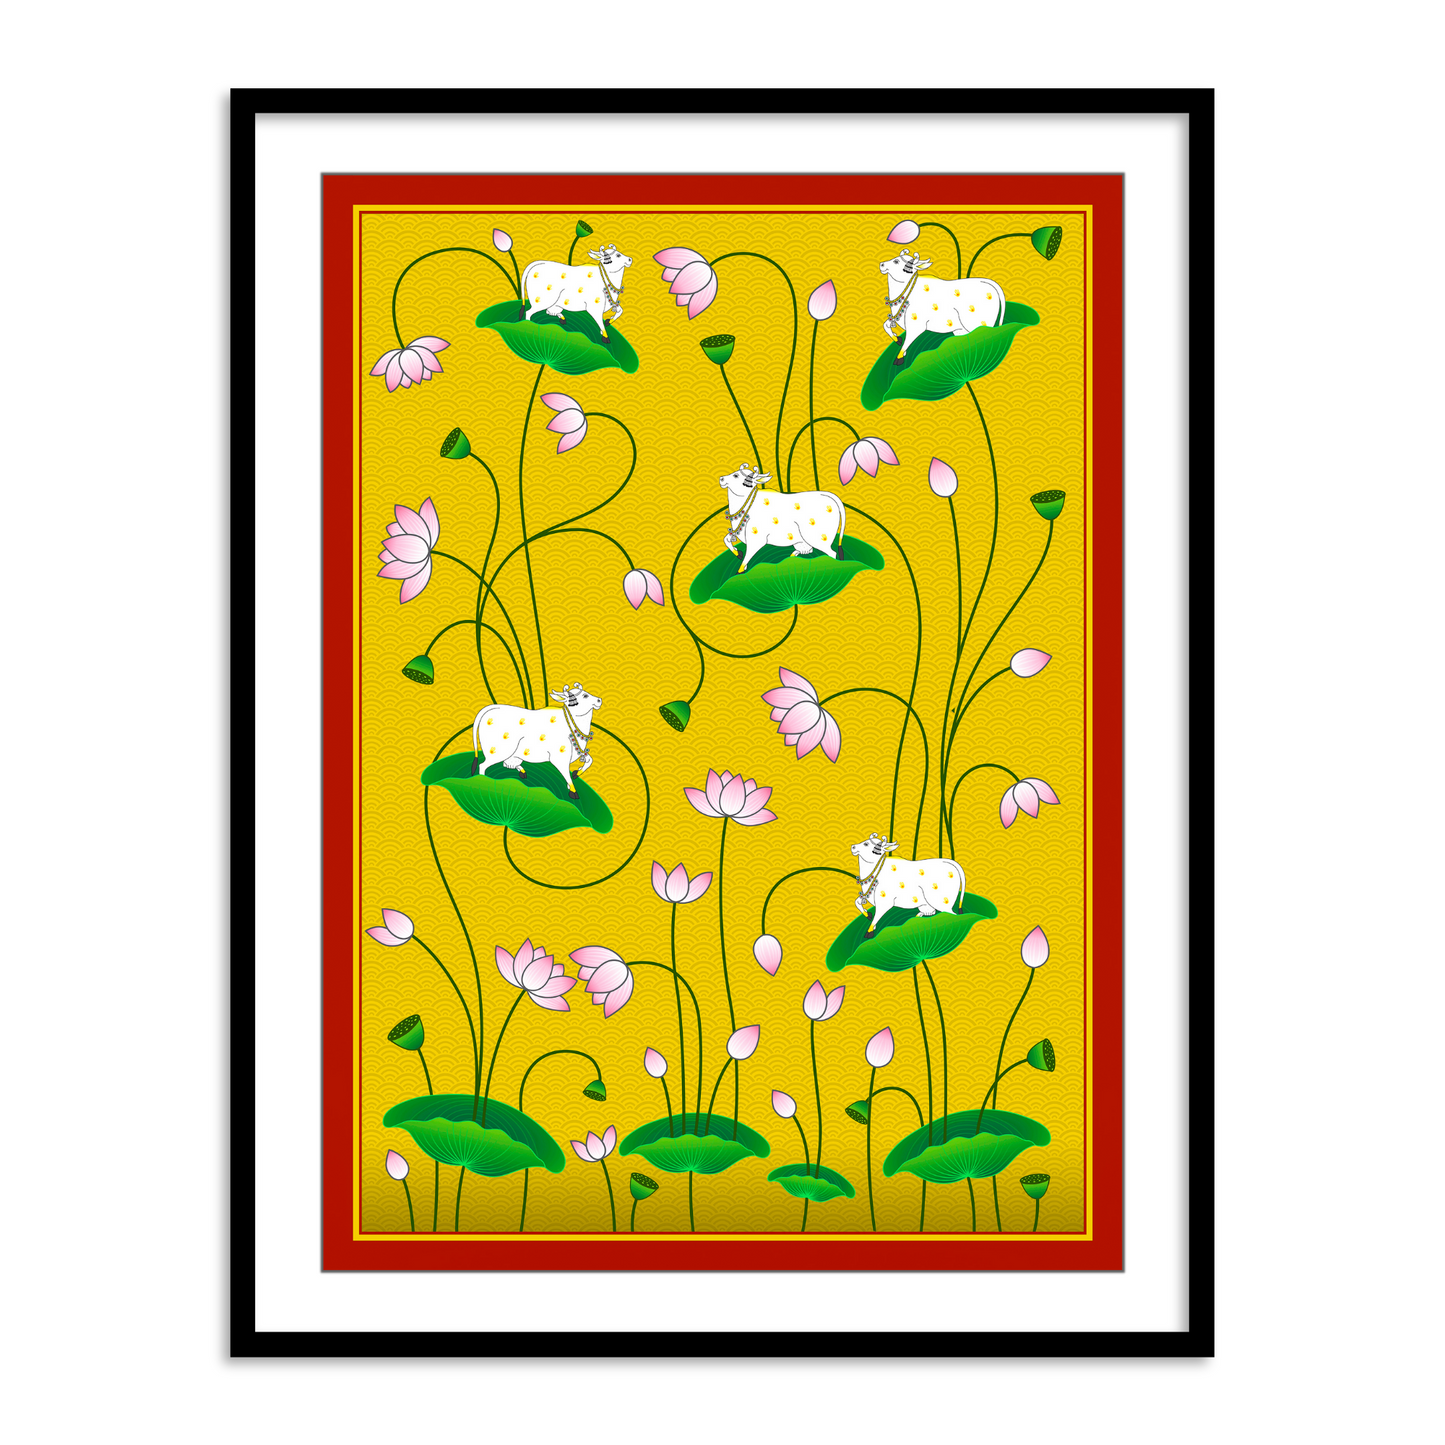 Pichwai Cow on Lotus Leaf | Pichwai Painting | Wall Art for Home decor